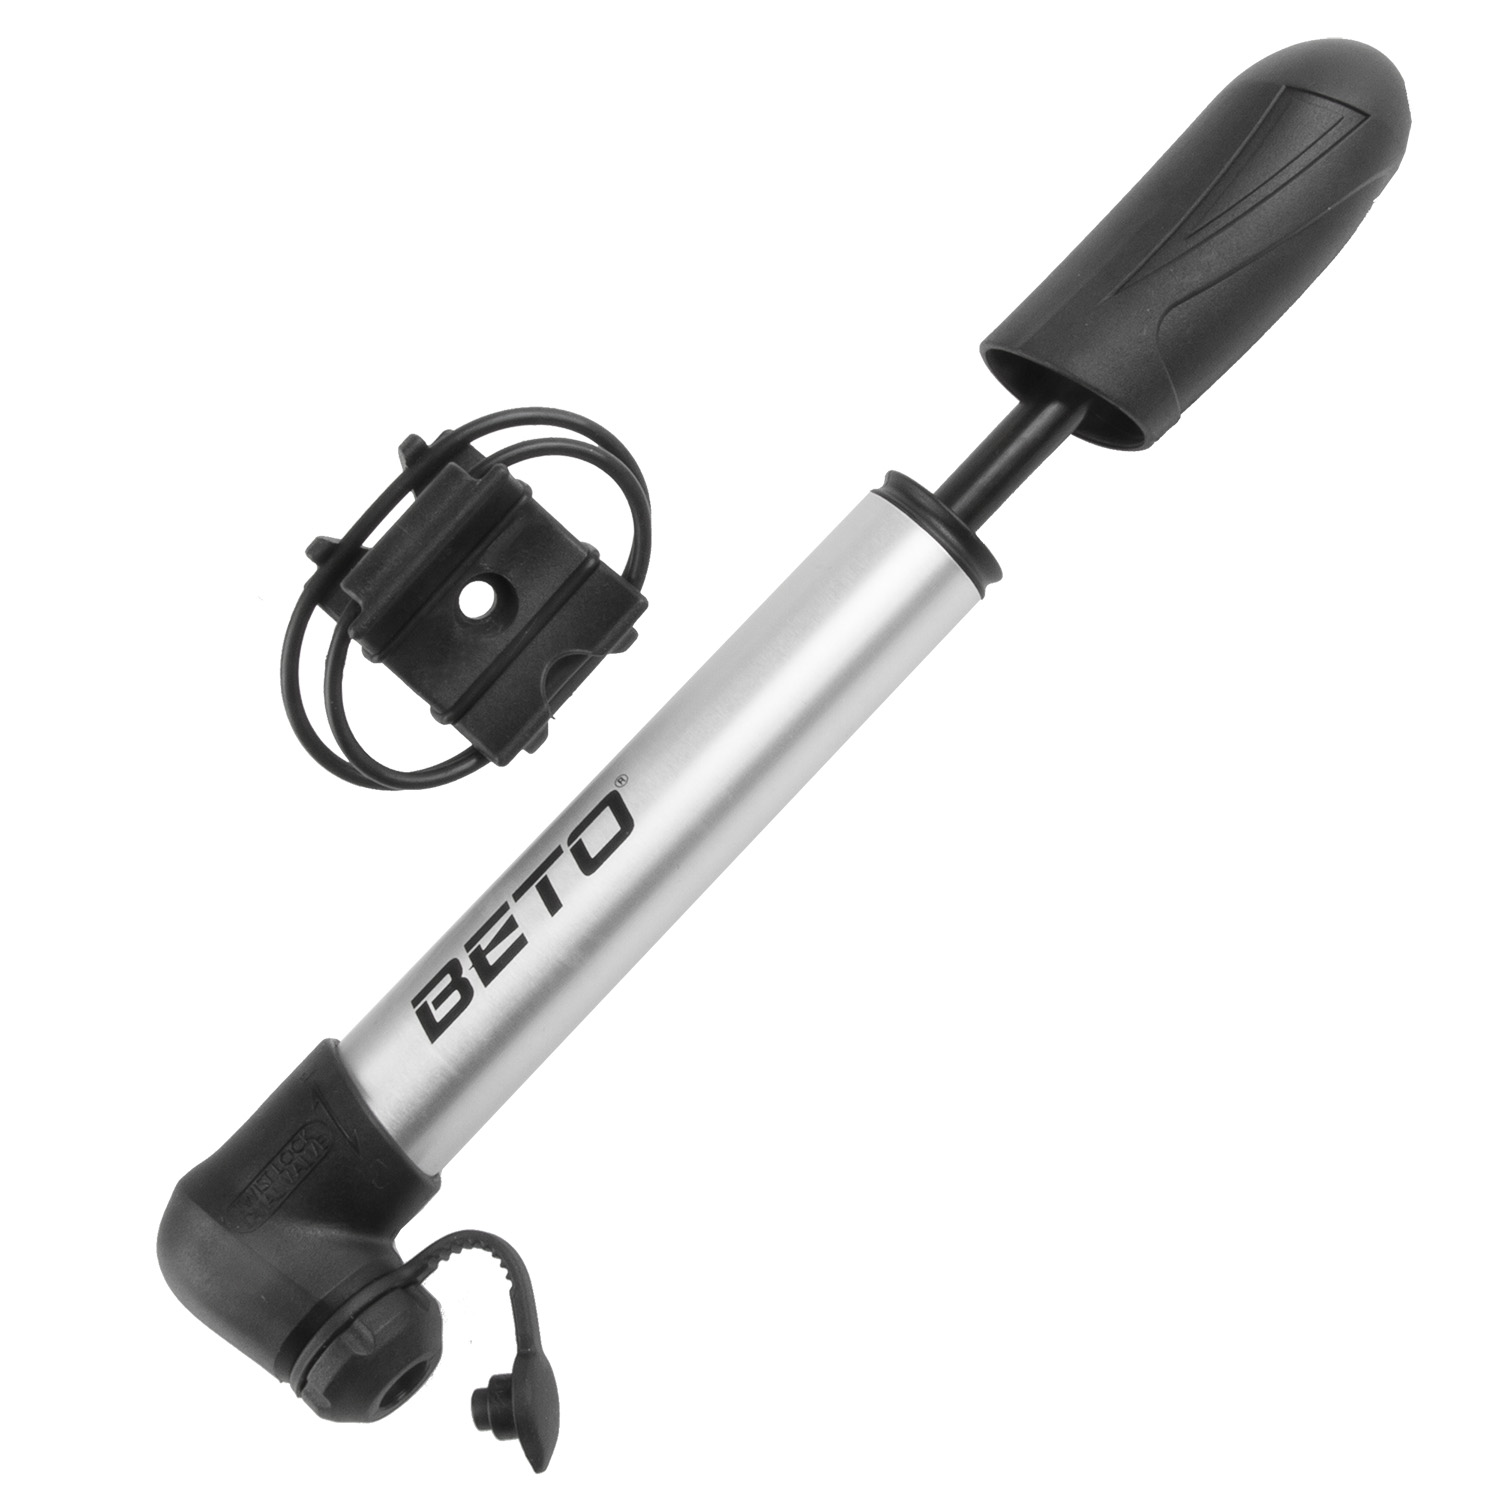 BETO TL 67 mini pump – AVAILABLE IN SELECTED BIKE SHOPS